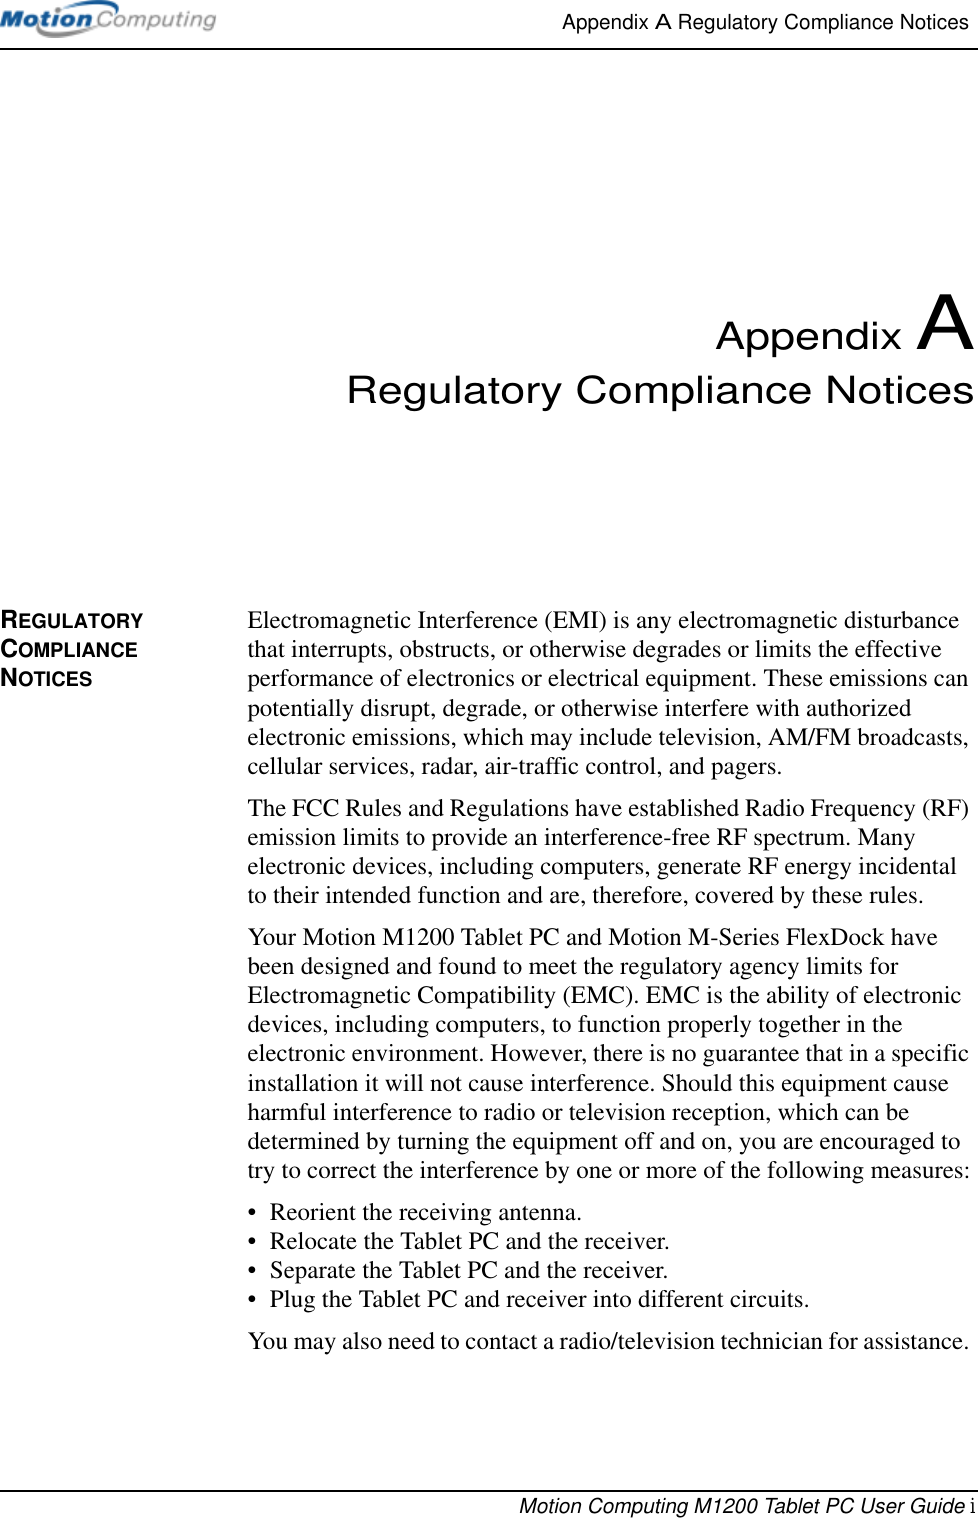 Appendix A Regulatory Compliance Notices Motion Computing M1200 Tablet PC User Guide iAppendix ARegulatory Compliance NoticesREGULATORY COMPLIANCE NOTICESElectromagnetic Interference (EMI) is any electromagnetic disturbance that interrupts, obstructs, or otherwise degrades or limits the effective performance of electronics or electrical equipment. These emissions can potentially disrupt, degrade, or otherwise interfere with authorized electronic emissions, which may include television, AM/FM broadcasts, cellular services, radar, air-traffic control, and pagers. The FCC Rules and Regulations have established Radio Frequency (RF) emission limits to provide an interference-free RF spectrum. Many electronic devices, including computers, generate RF energy incidental to their intended function and are, therefore, covered by these rules. Your Motion M1200 Tablet PC and Motion M-Series FlexDock have been designed and found to meet the regulatory agency limits for Electromagnetic Compatibility (EMC). EMC is the ability of electronic devices, including computers, to function properly together in the electronic environment. However, there is no guarantee that in a specific installation it will not cause interference. Should this equipment cause harmful interference to radio or television reception, which can be determined by turning the equipment off and on, you are encouraged to try to correct the interference by one or more of the following measures:• Reorient the receiving antenna.• Relocate the Tablet PC and the receiver.• Separate the Tablet PC and the receiver.• Plug the Tablet PC and receiver into different circuits.You may also need to contact a radio/television technician for assistance. 